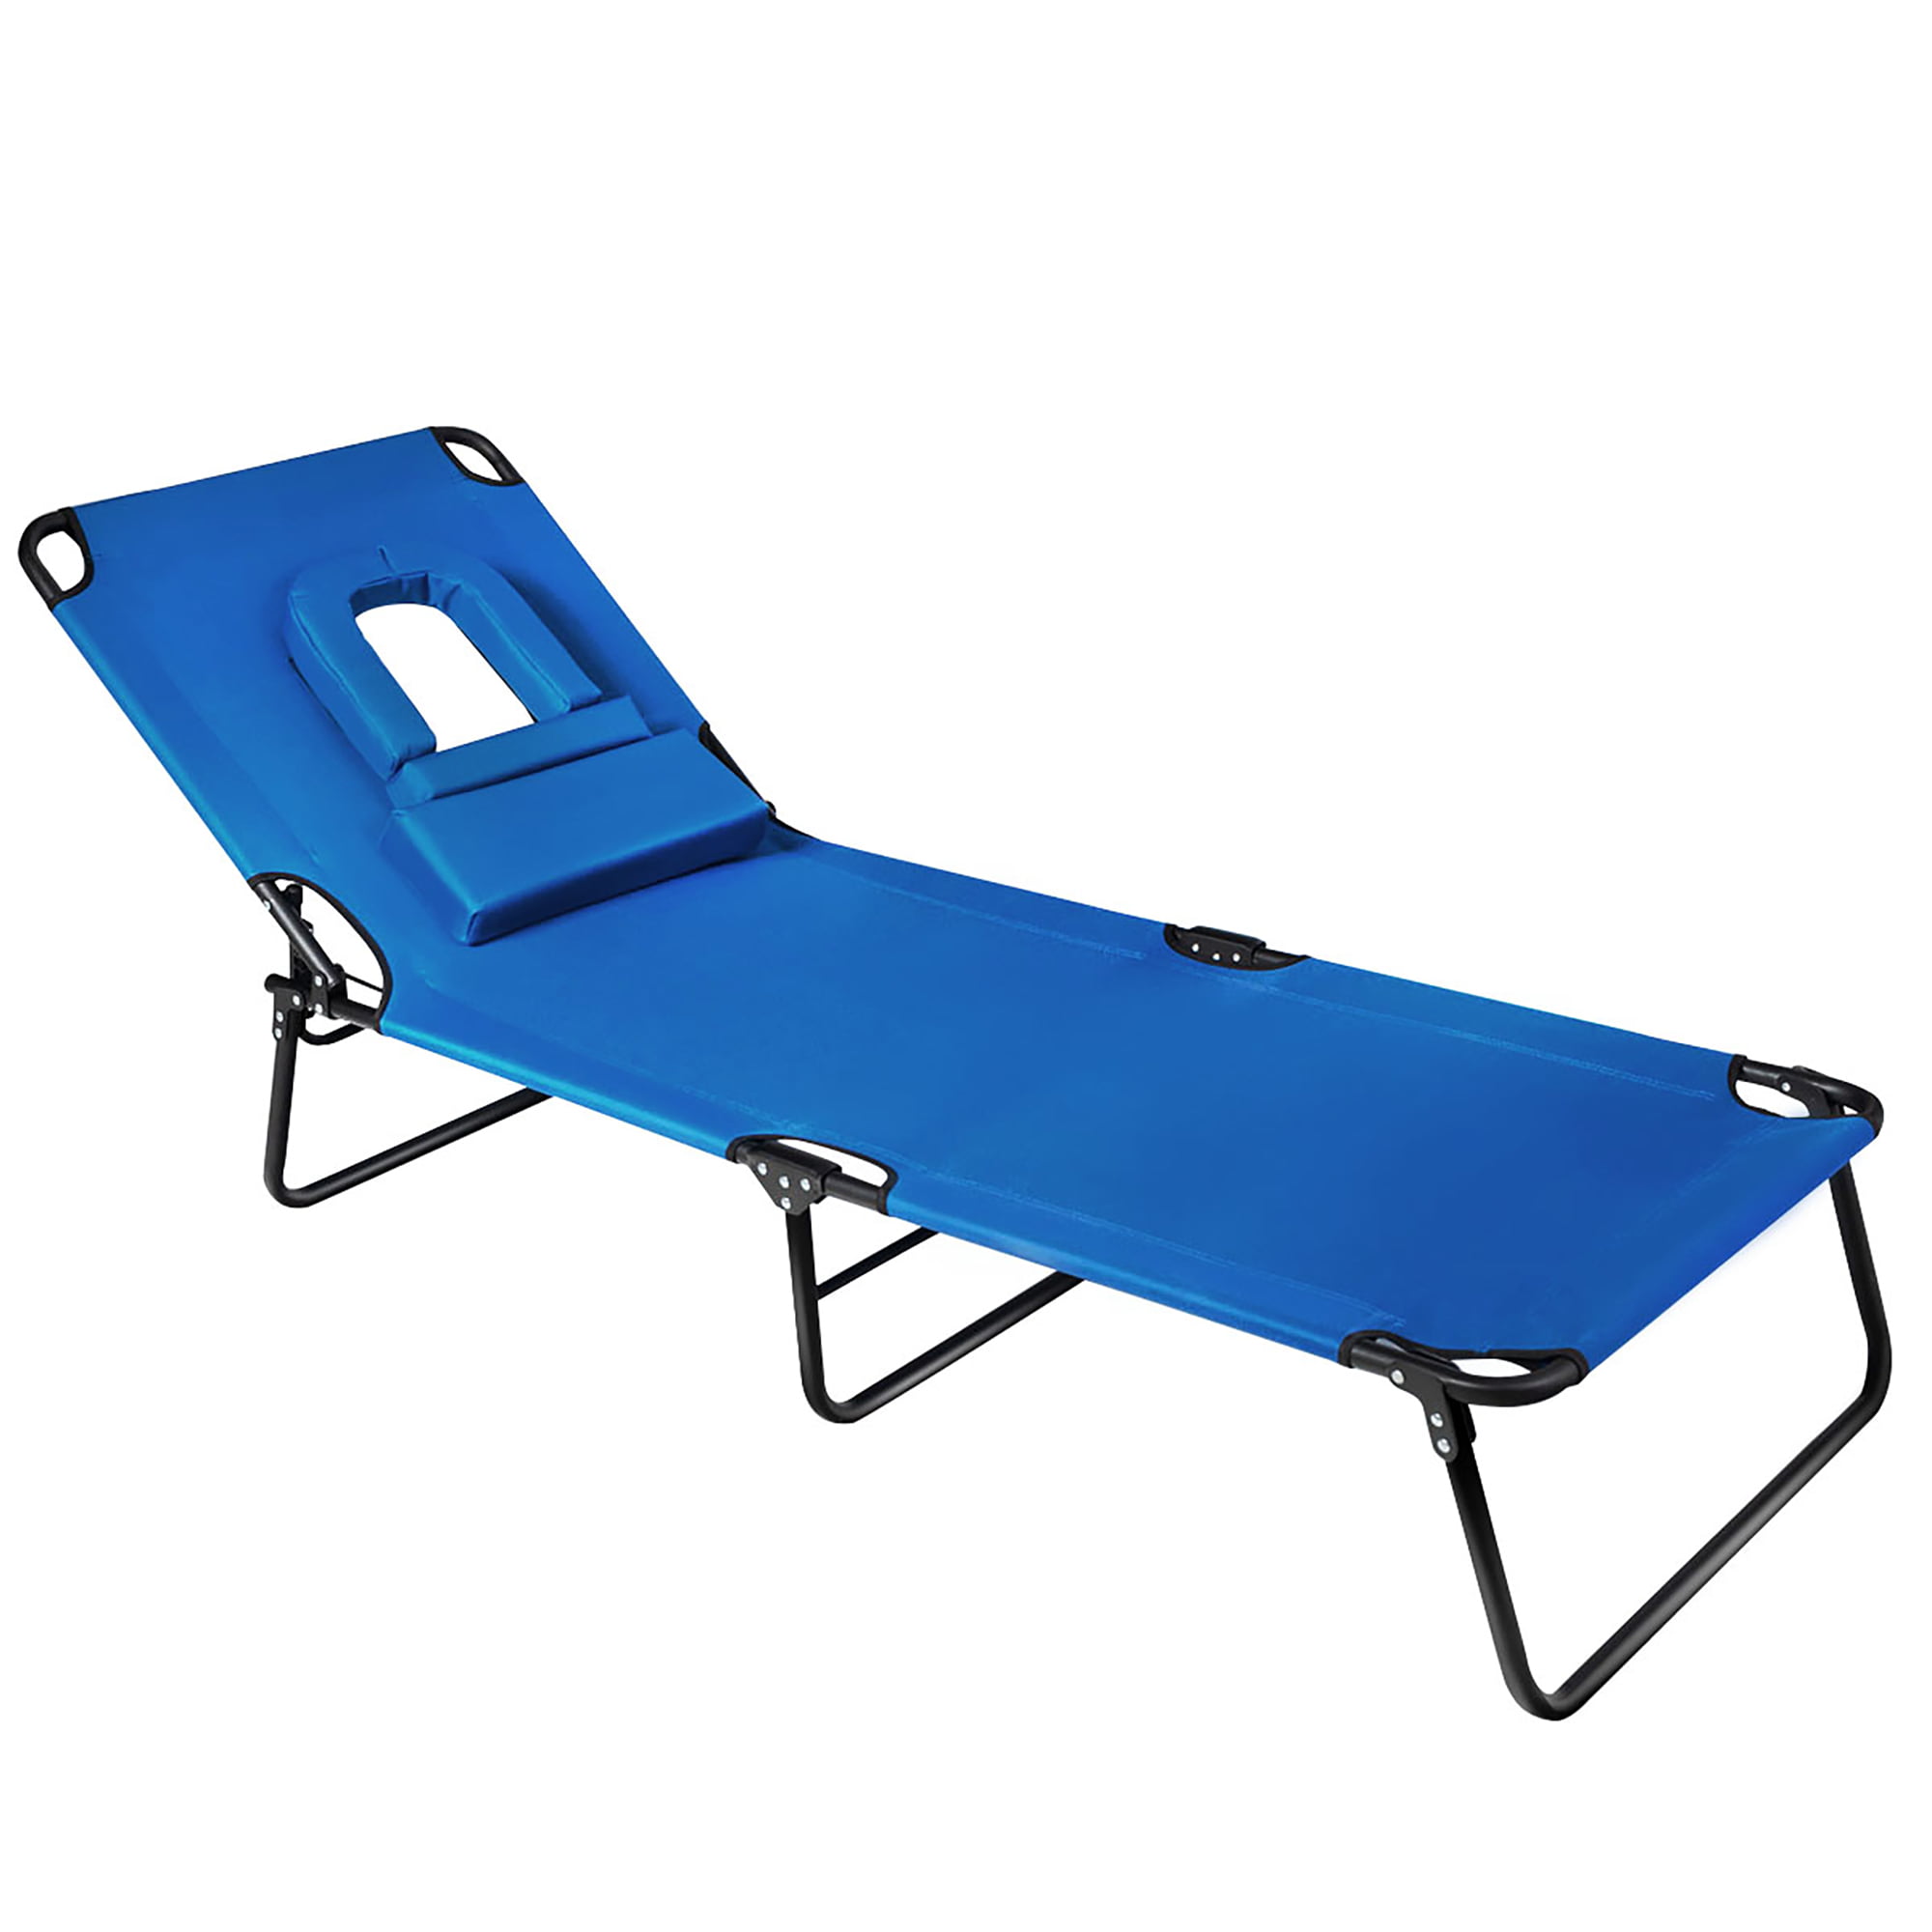 Costway Patio Foldable Chaise Lounge Chair Bed Outdoor Beach Camping ...